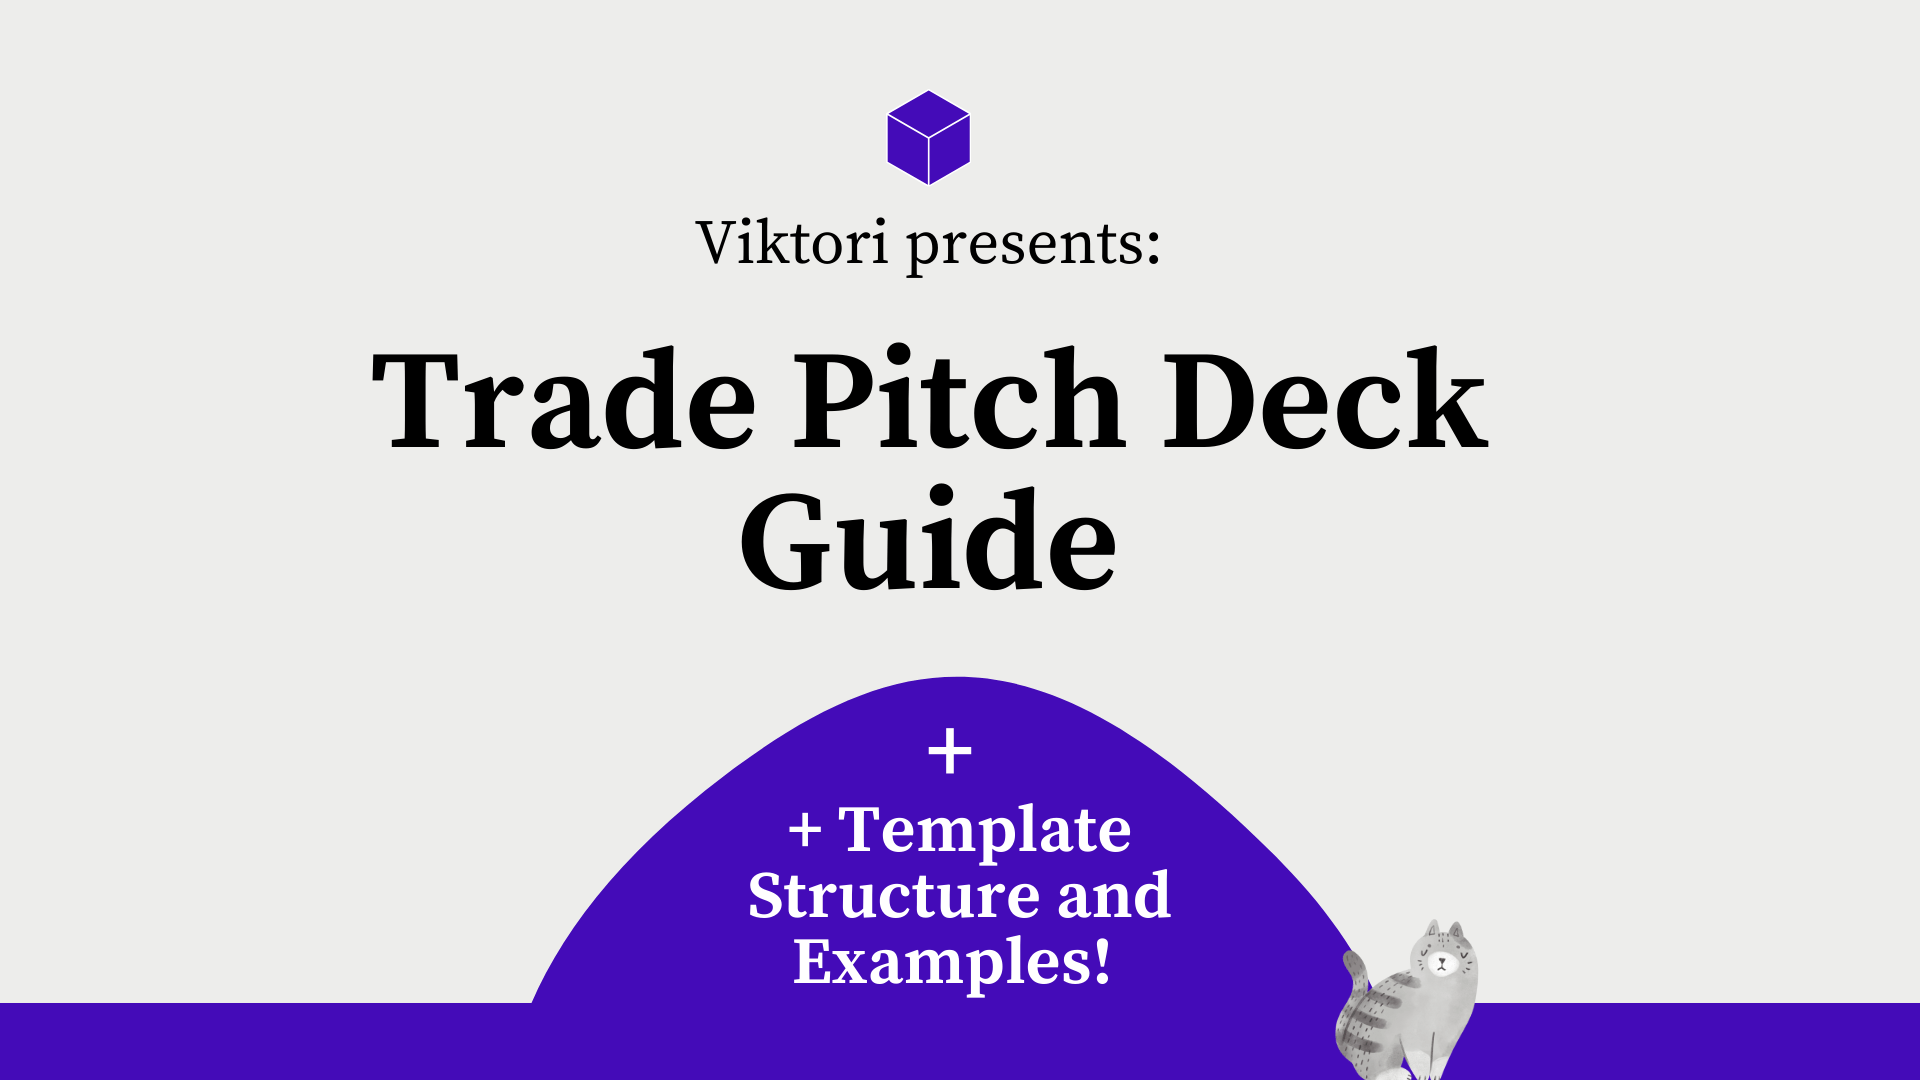 Trade Pitch Deck Guide